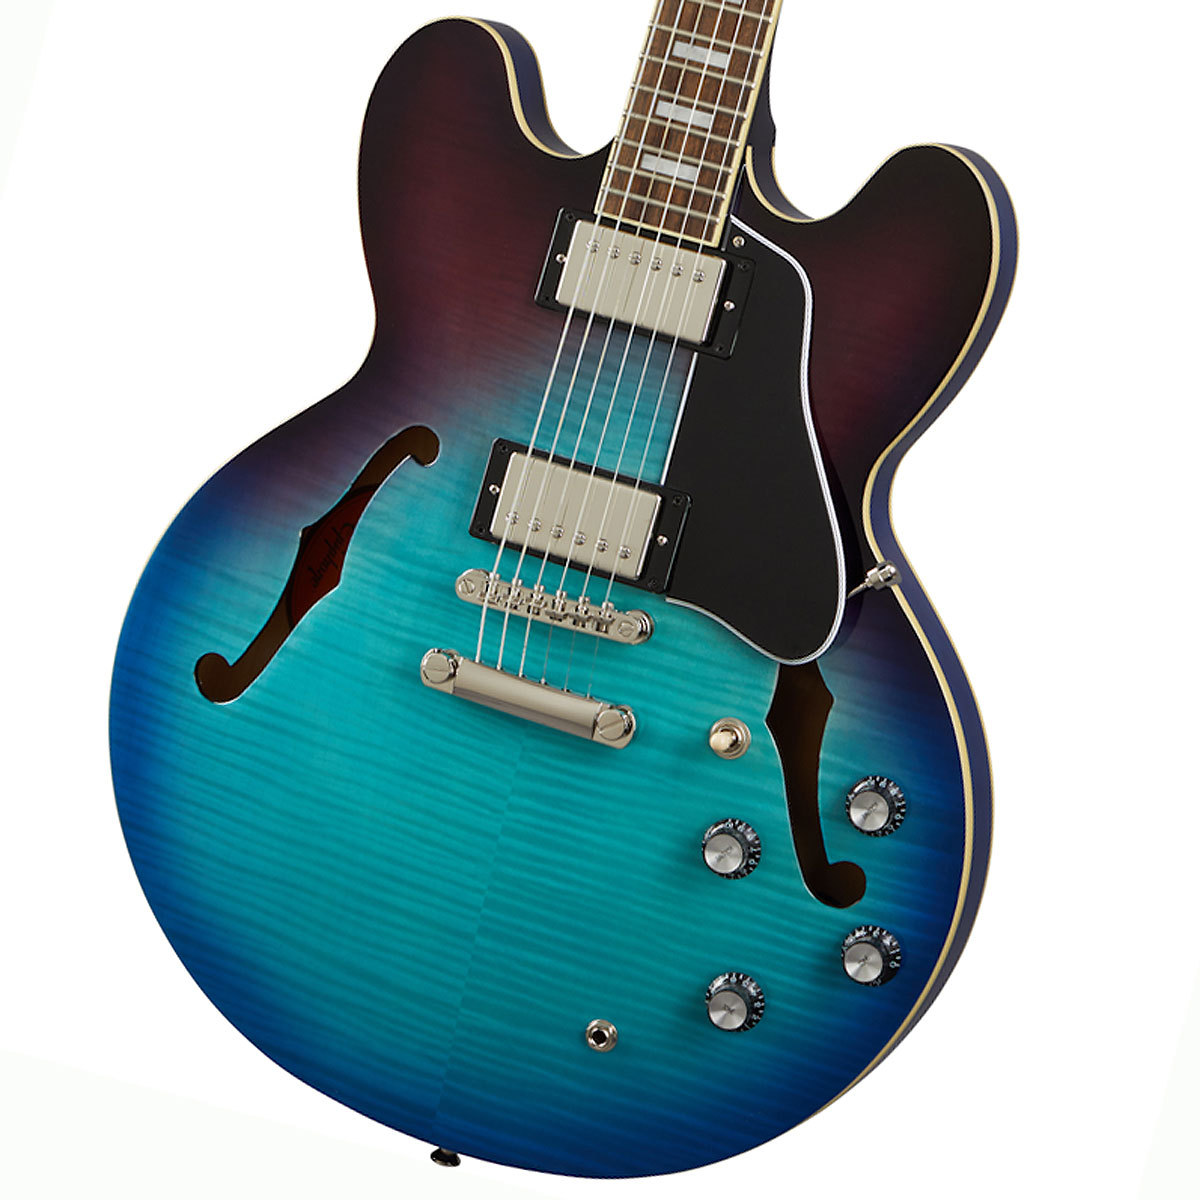 Epiphone / Inspired by Gibson ES-335 Figured Blueberry Burst (BBB) エピフォン  エレキギター セミアコ ES335 | イシバシ楽器